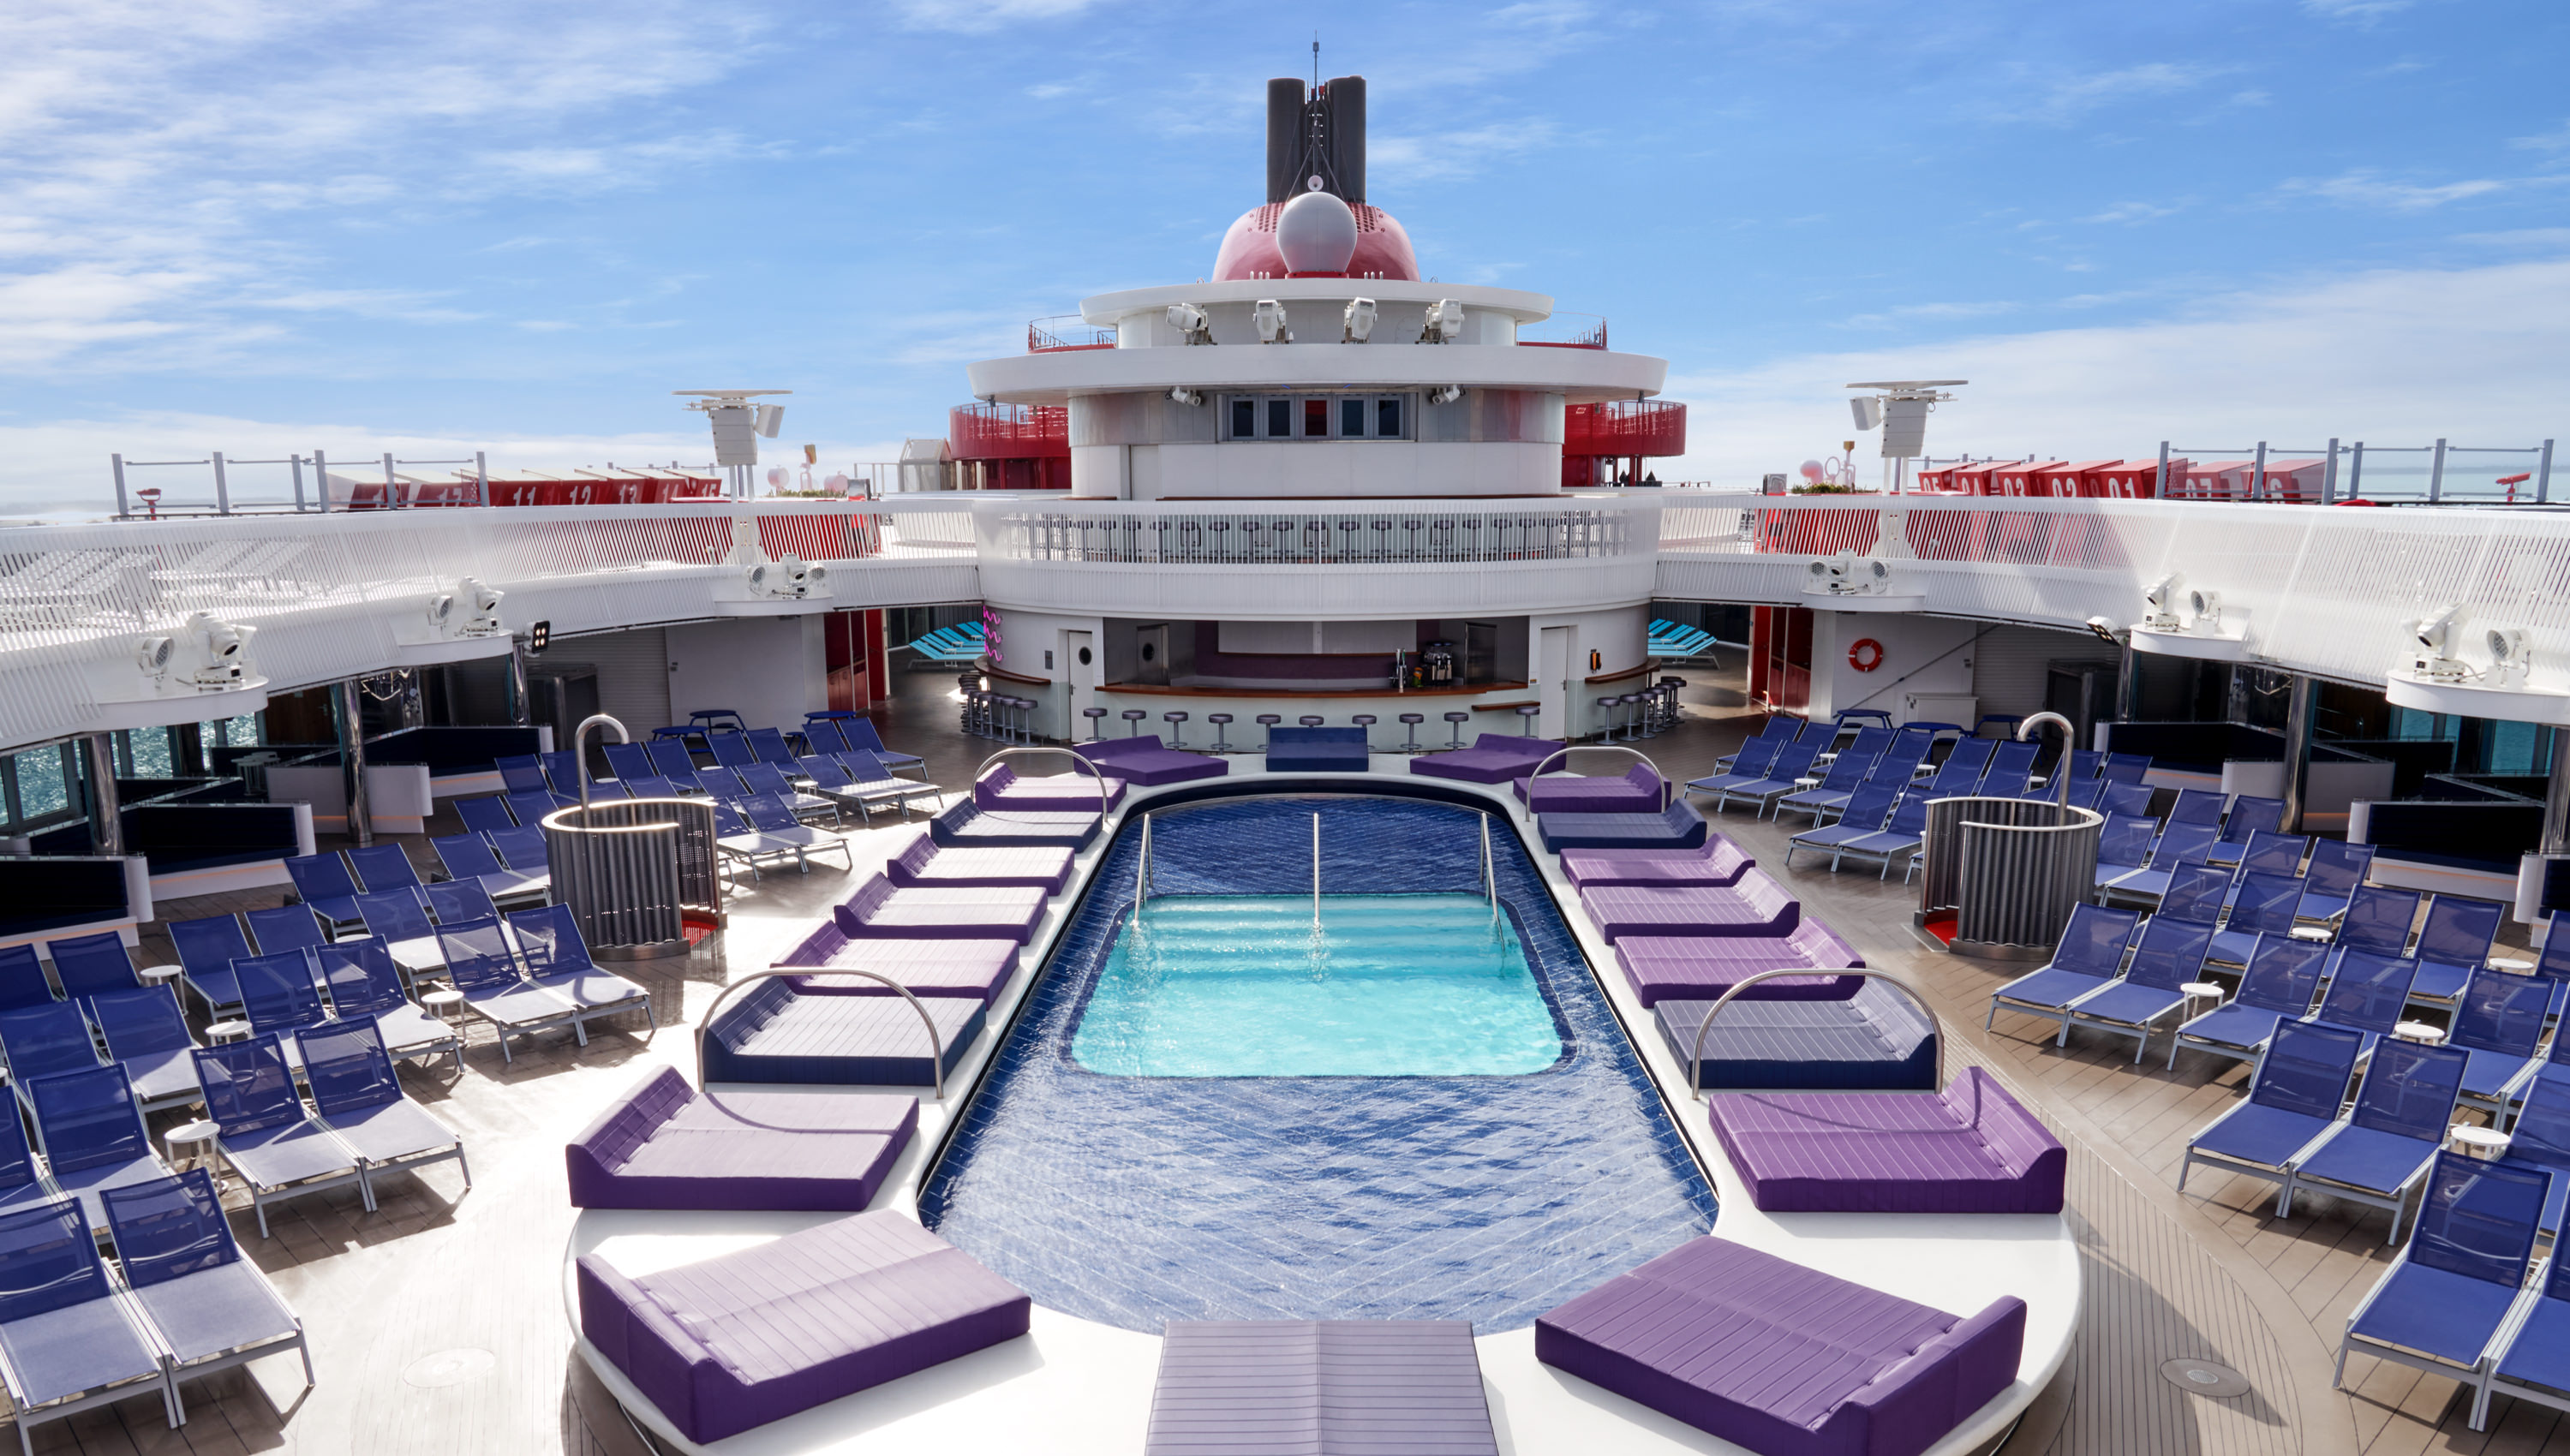 An Insider's Look at Virgin Voyages' Inaugural Cruise Ship Scarlet Lady